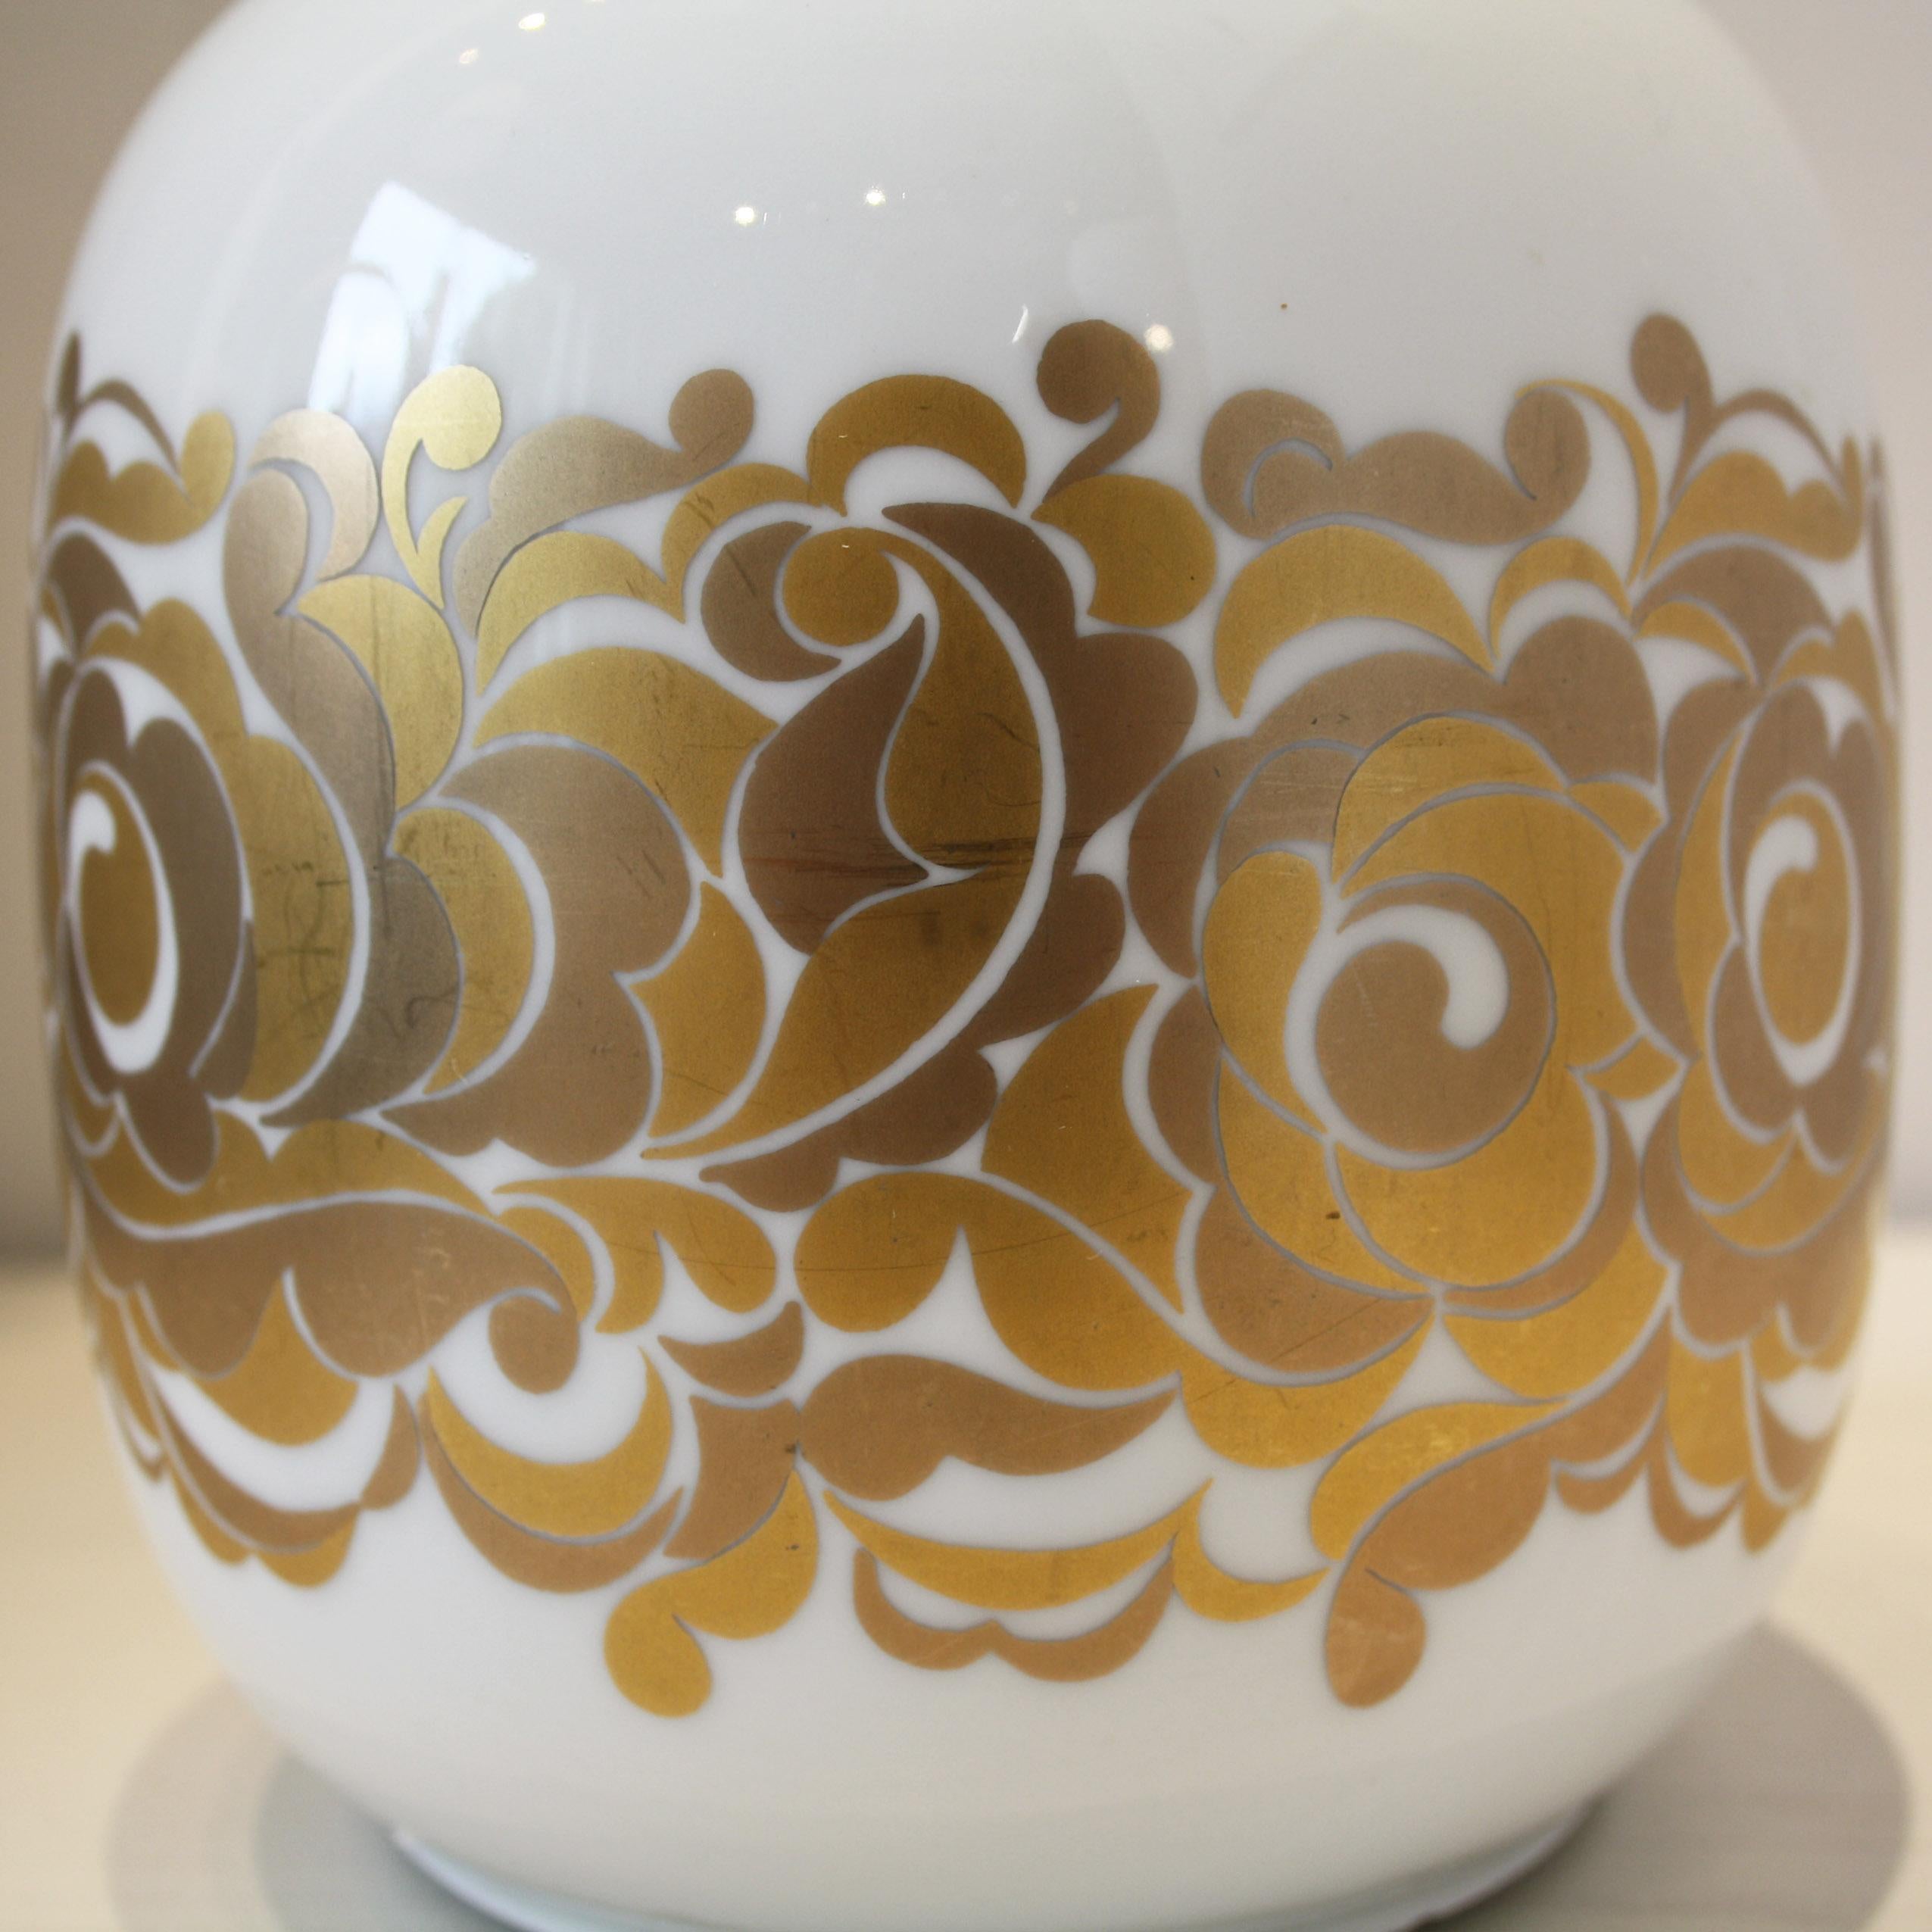 White porcelain vase with gold floral design. Made in Germany

15Dia x 25H cm

Good vintage condition